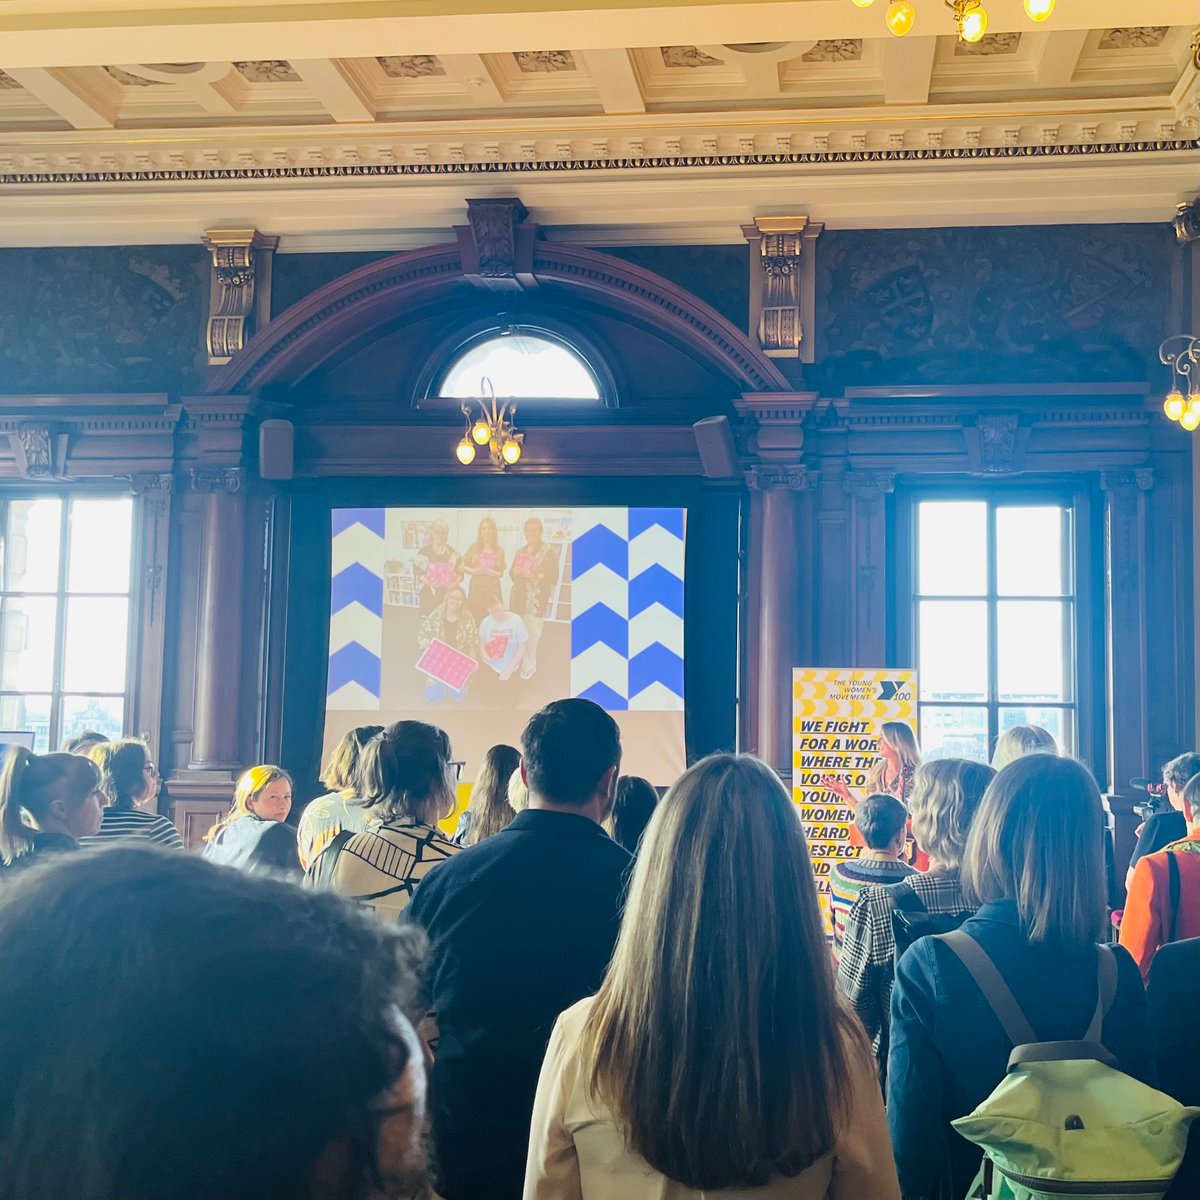 Happy 100th Birthday! #YWM100 🎂 Yesterday @youngwomenscot kicked off the celebrations of a whole century of embedding safe spaces & wellbeing for young women & girls. It was a fantastic event attended by many amazing people working to make an equal world for women and girls.